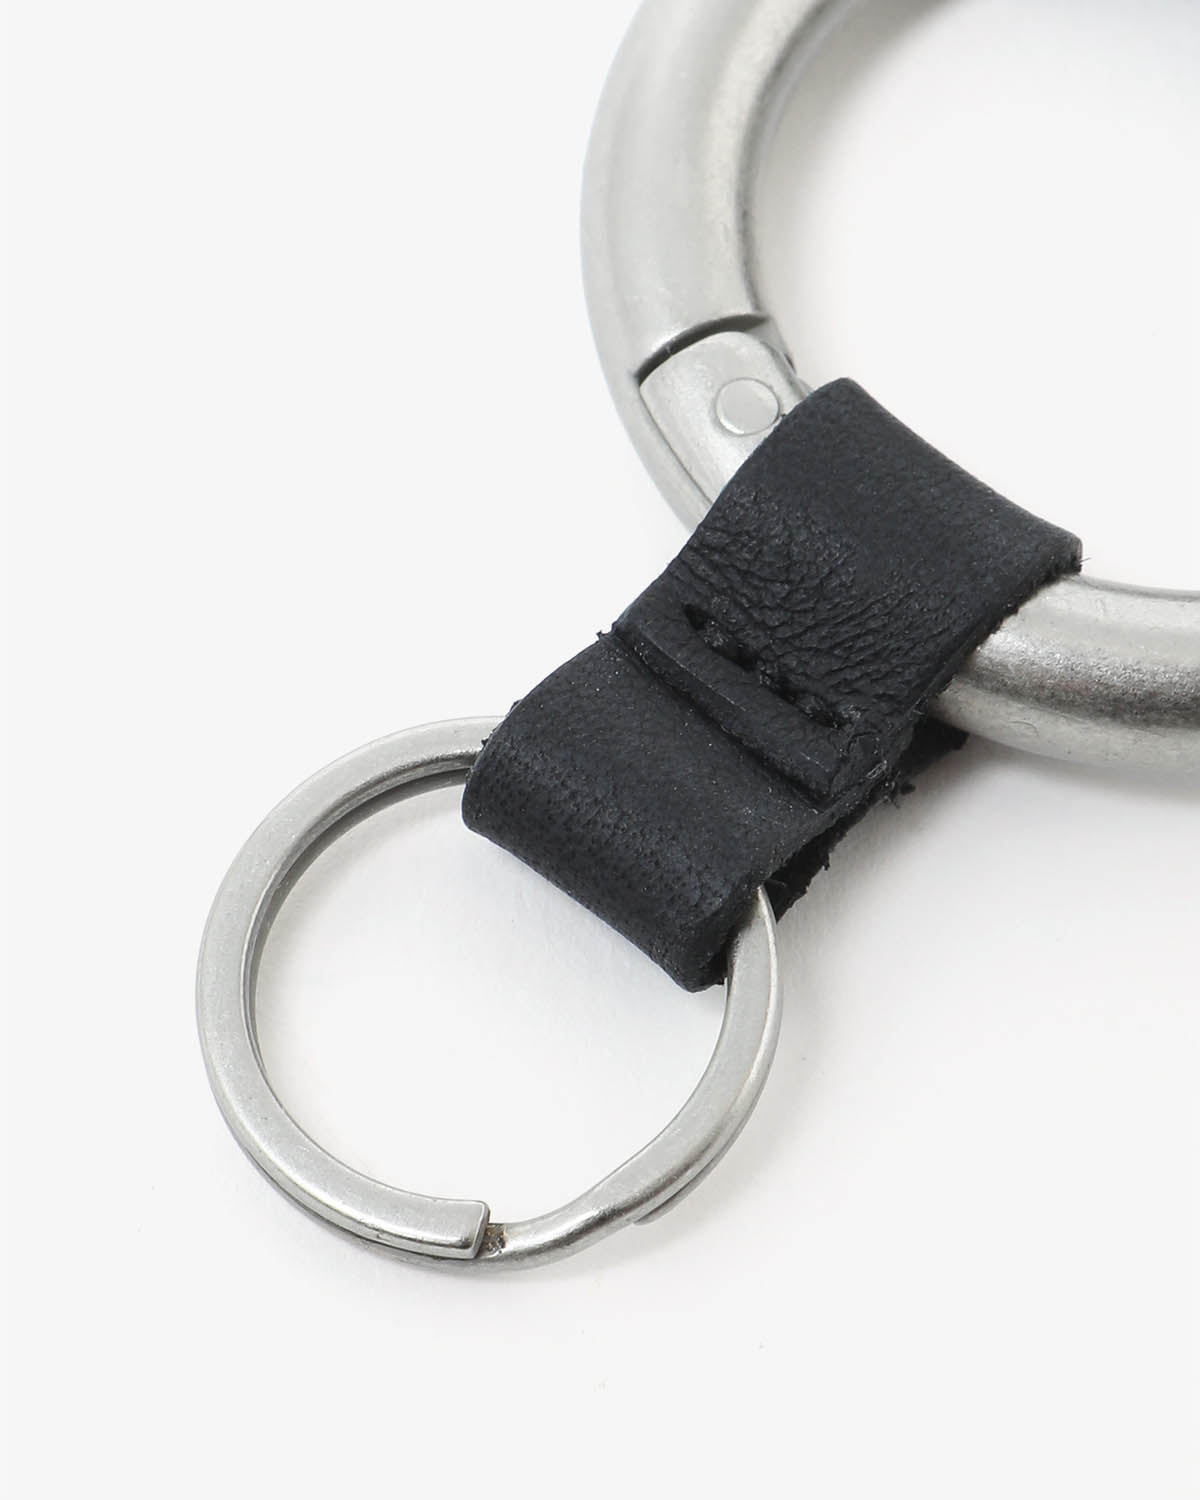 ROUND KEY RING with COW LEATHER for CITY COUNTRY CITY